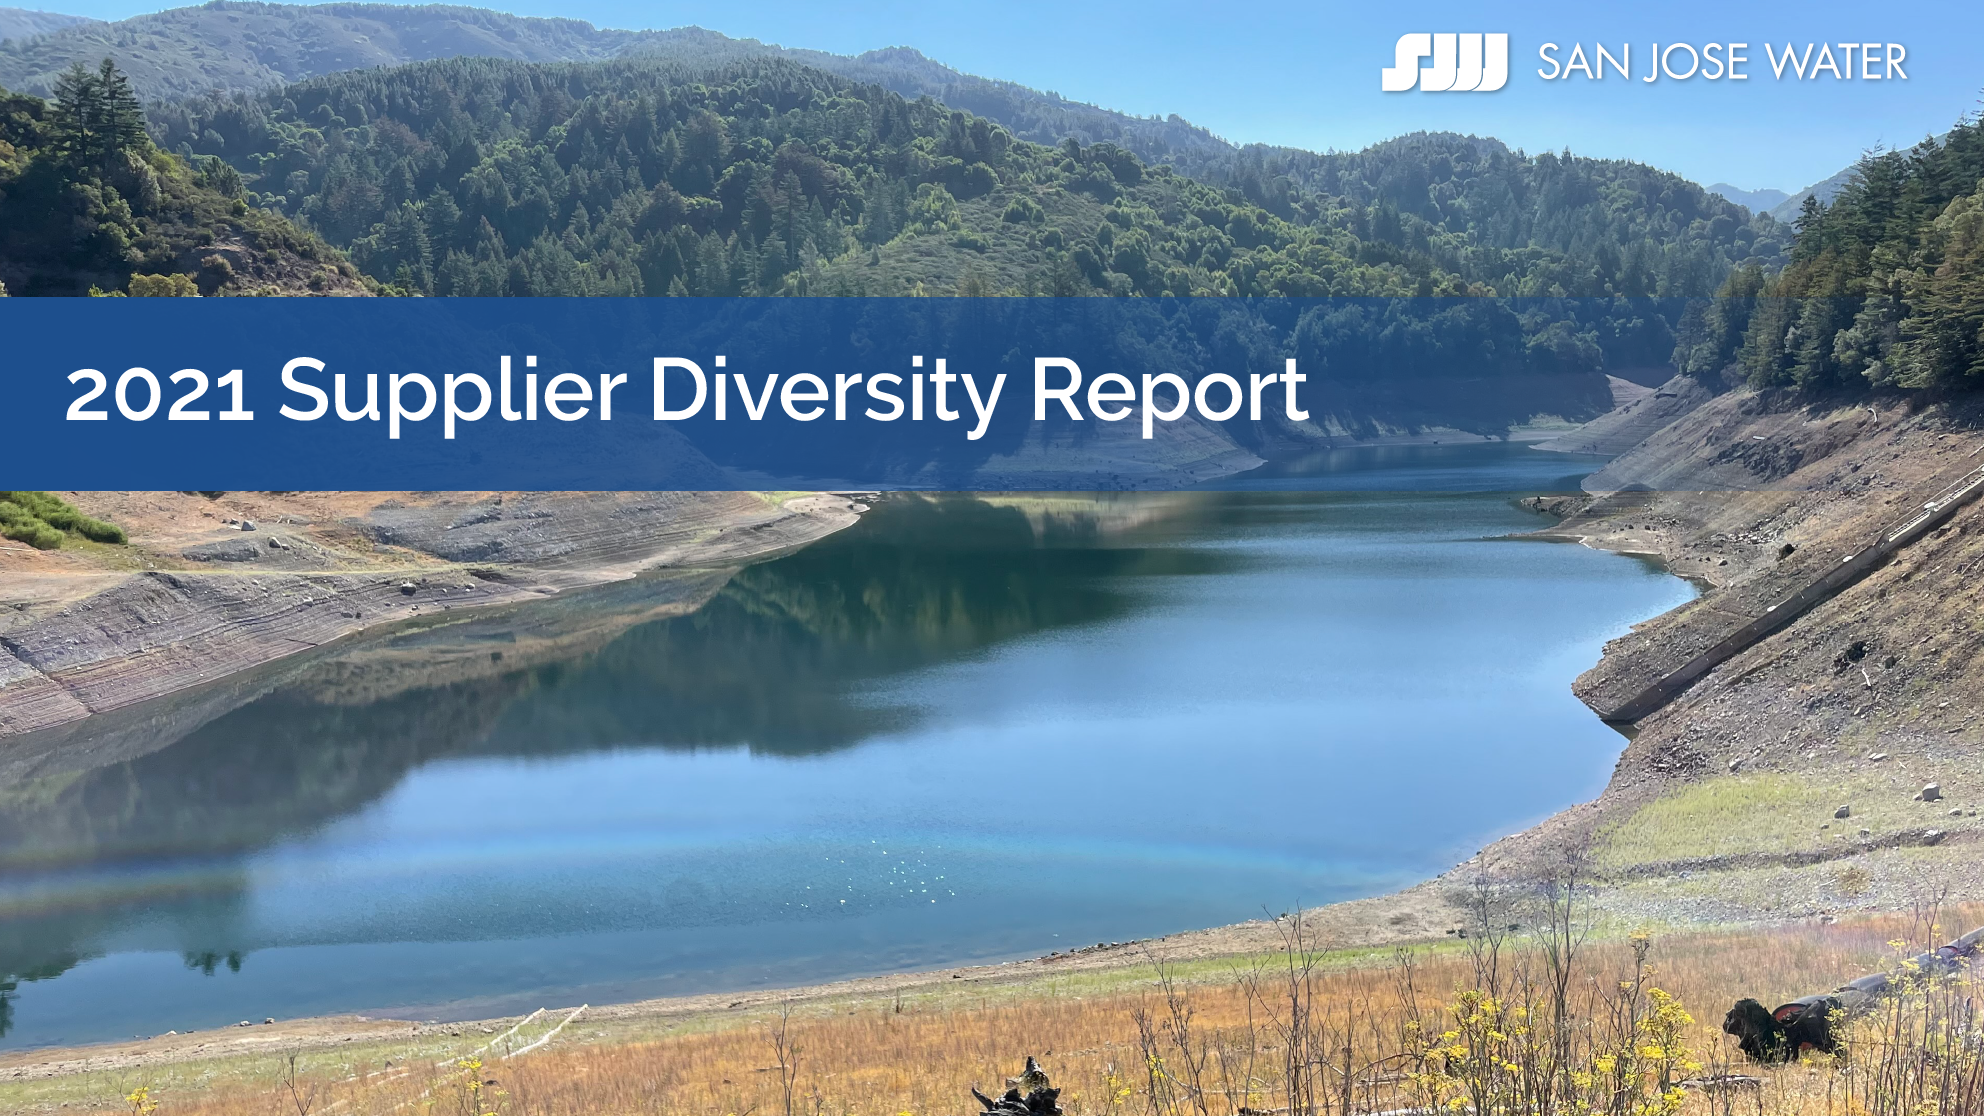 2021 Supplier Diversity Report image of drought-impacted reservoir